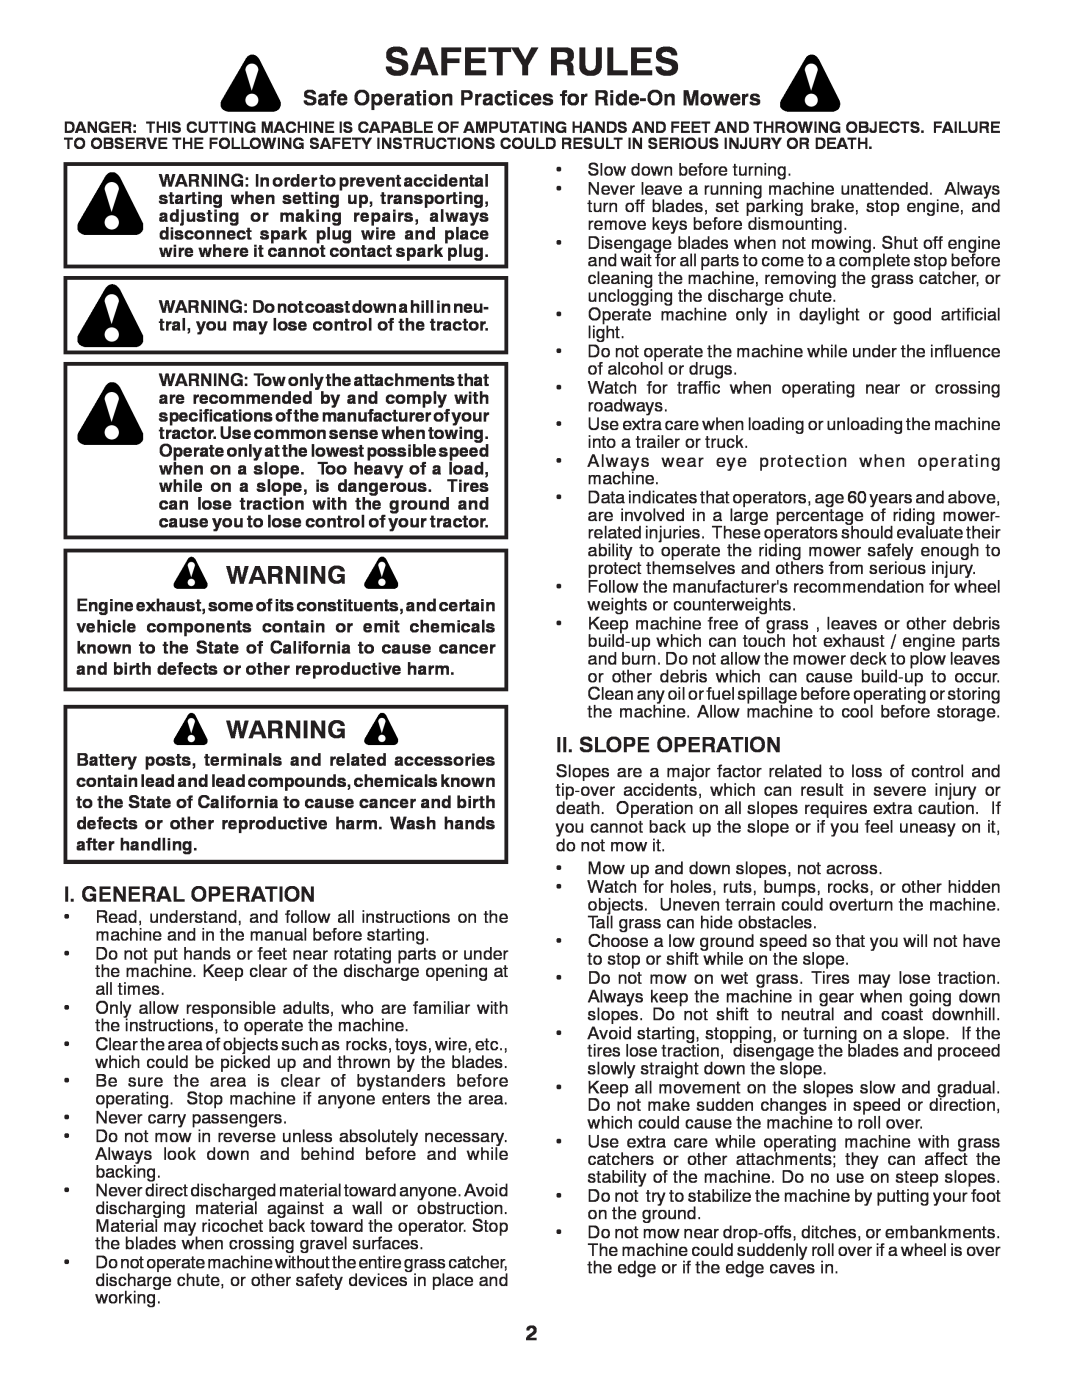 Dixon 435068, D25K48YT Safety Rules, Safe Operation Practices for Ride-OnMowers, I. General Operation, Ii. Slope Operation 